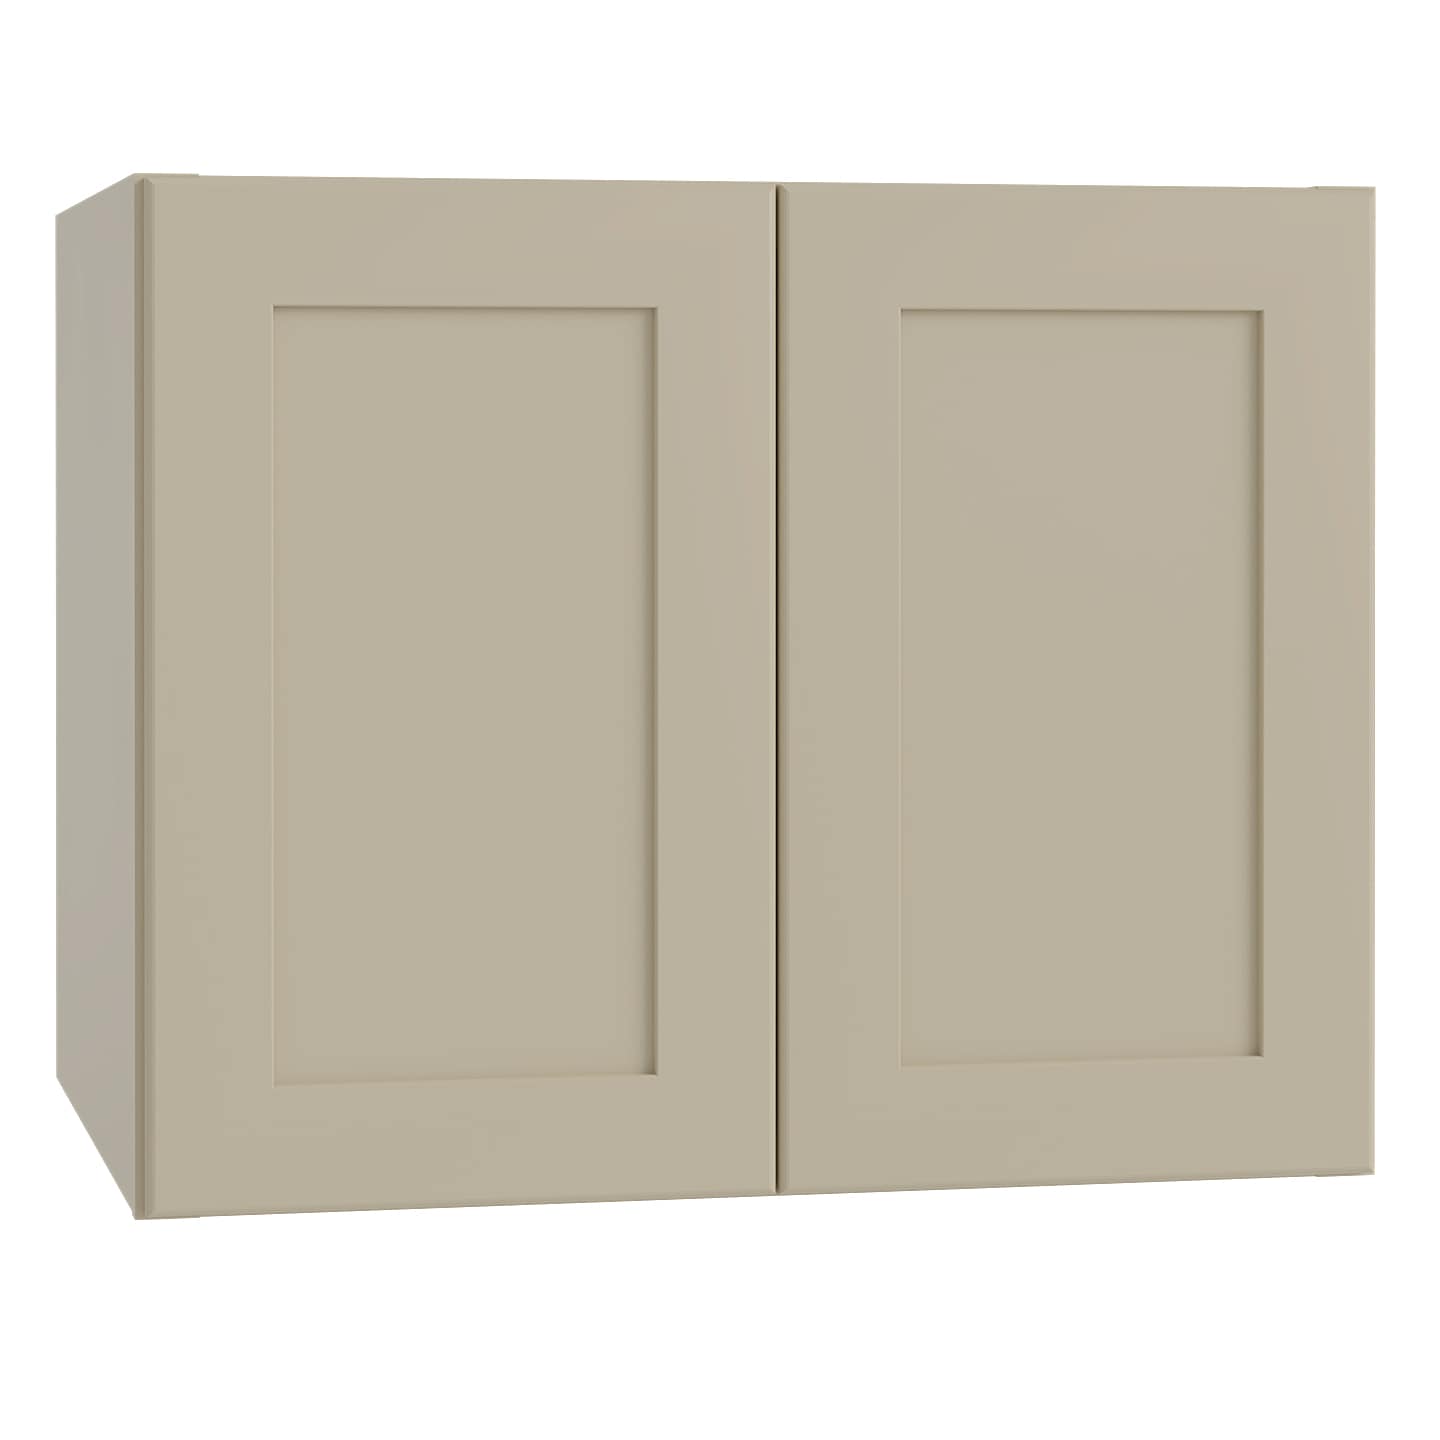 Luxxe Cabinetry 36-in W x 23.5-in H x 24-in D Norfolk Blended Cream Painted Door Wall Fully Assembled Semi-custom Cabinet in Off-White | W362424-NBC